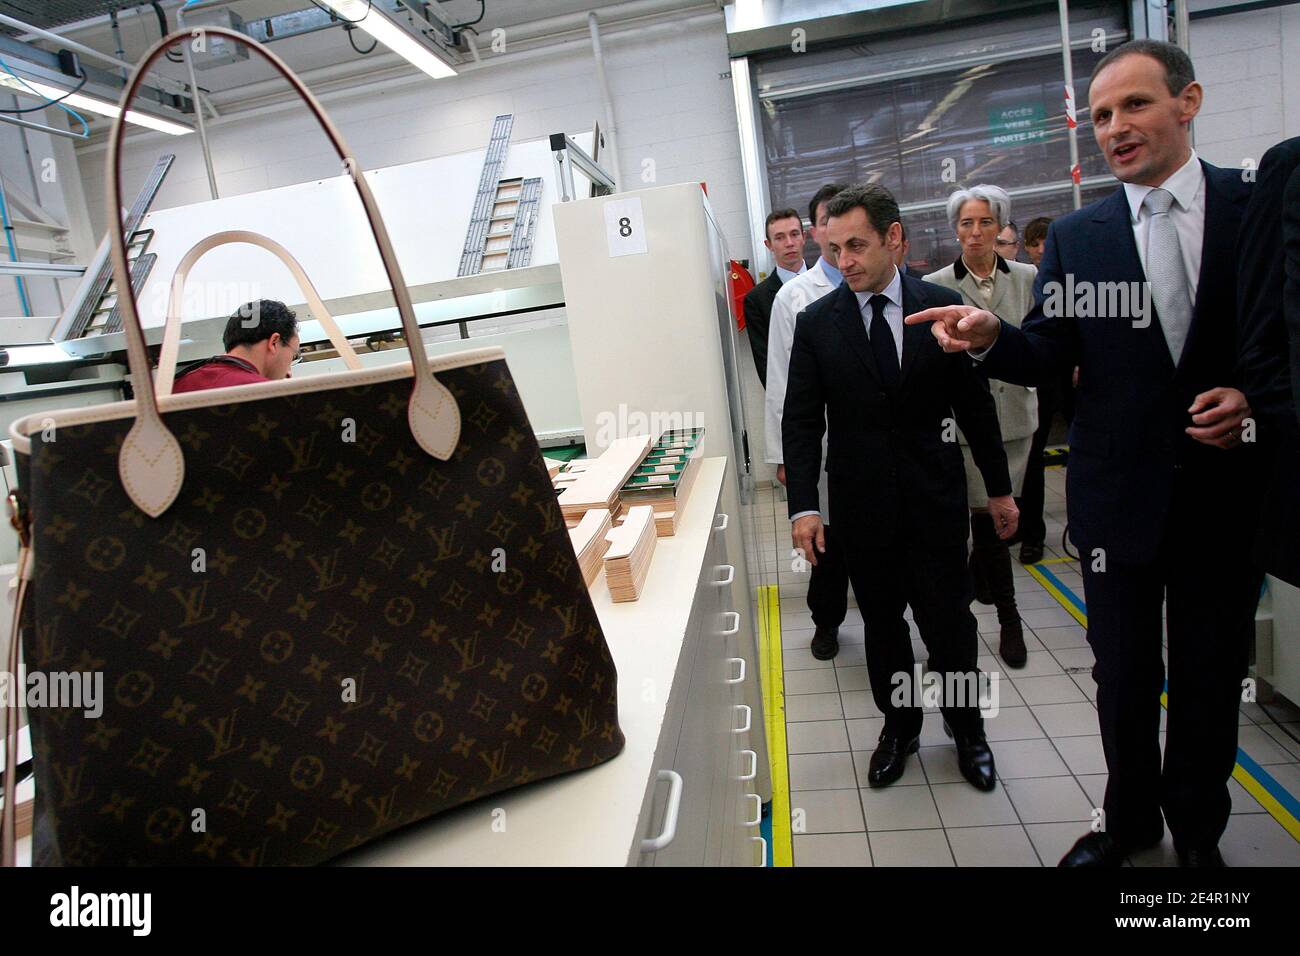 French President Nicolas Sarkozy visits the manufacture of Louis Vuitton in  Saint-Pourcain-sur-Sioule, France on February 26, 2008. Photo by  Mousse/ABACAPRESS.COM Stock Photo - Alamy